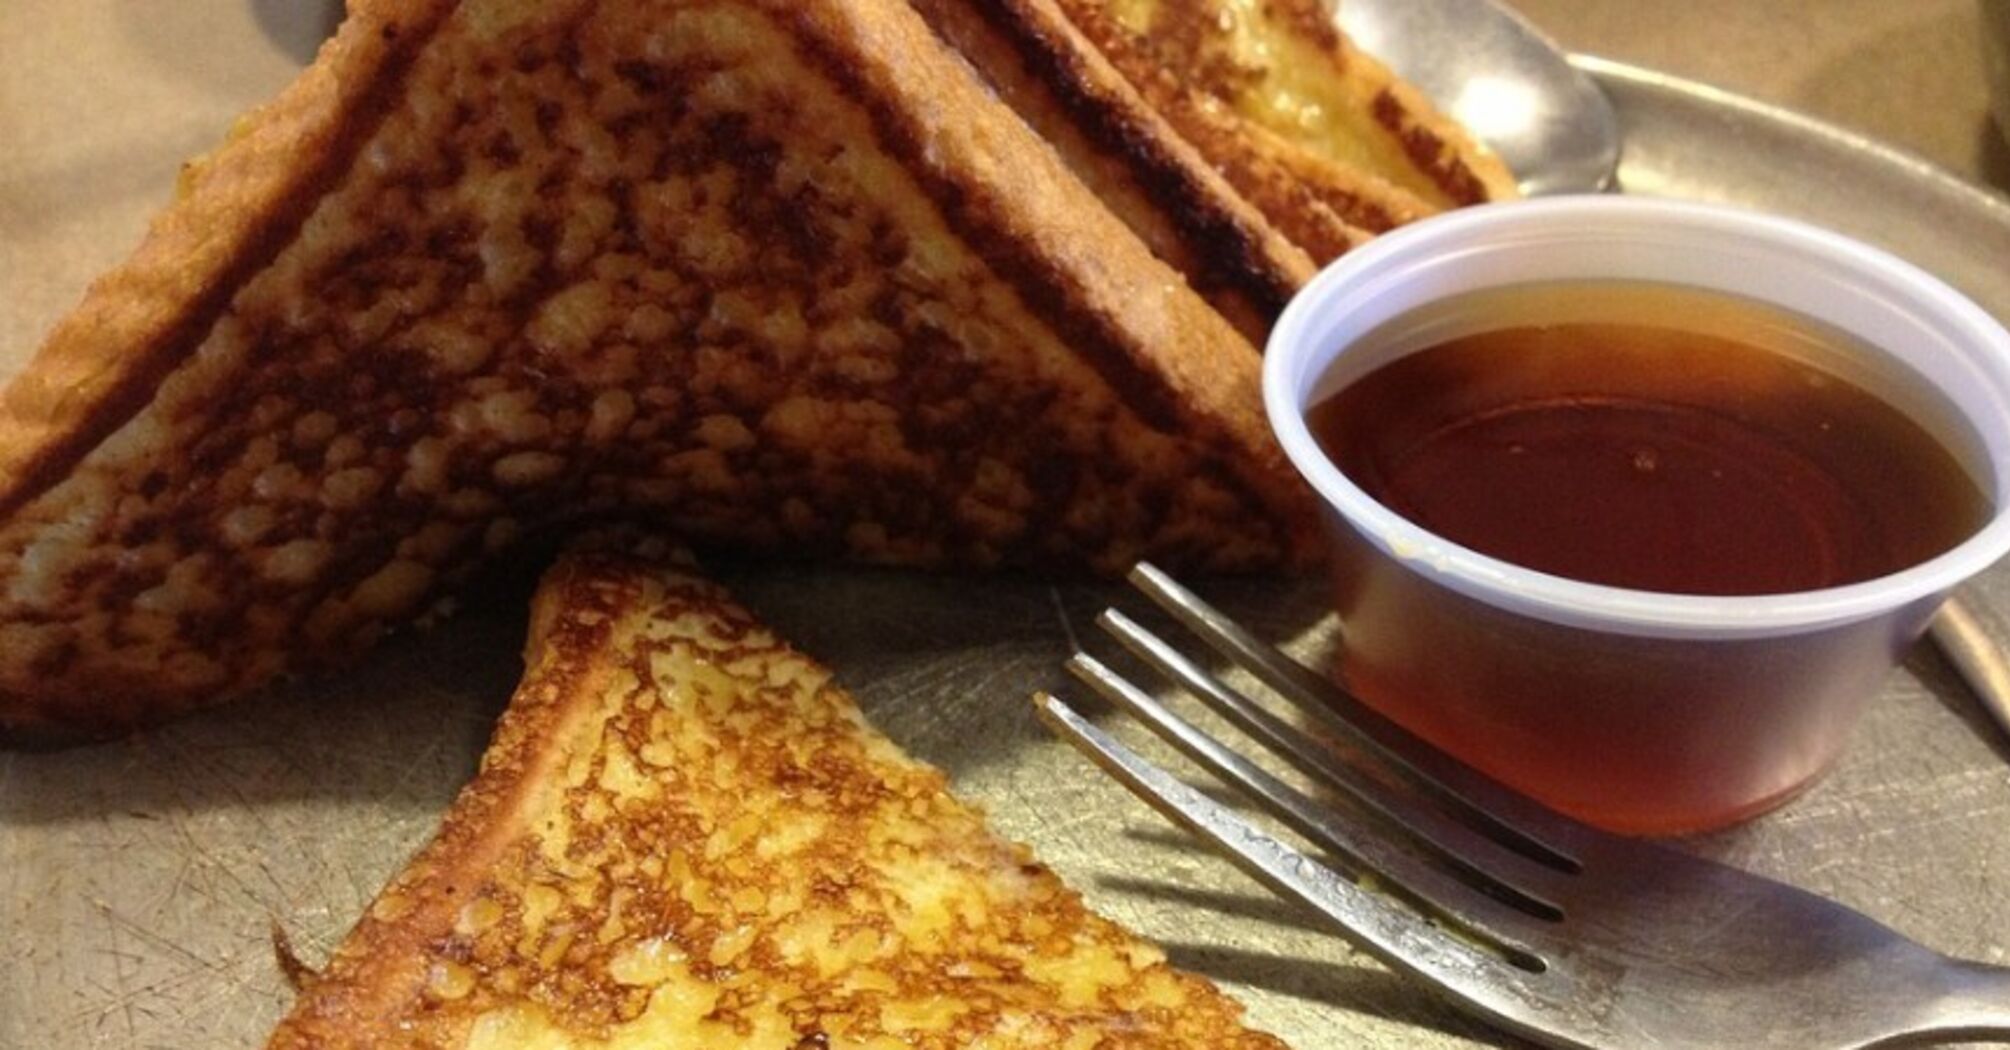 Hot toast in a new way: breakfast and dessert at the same time